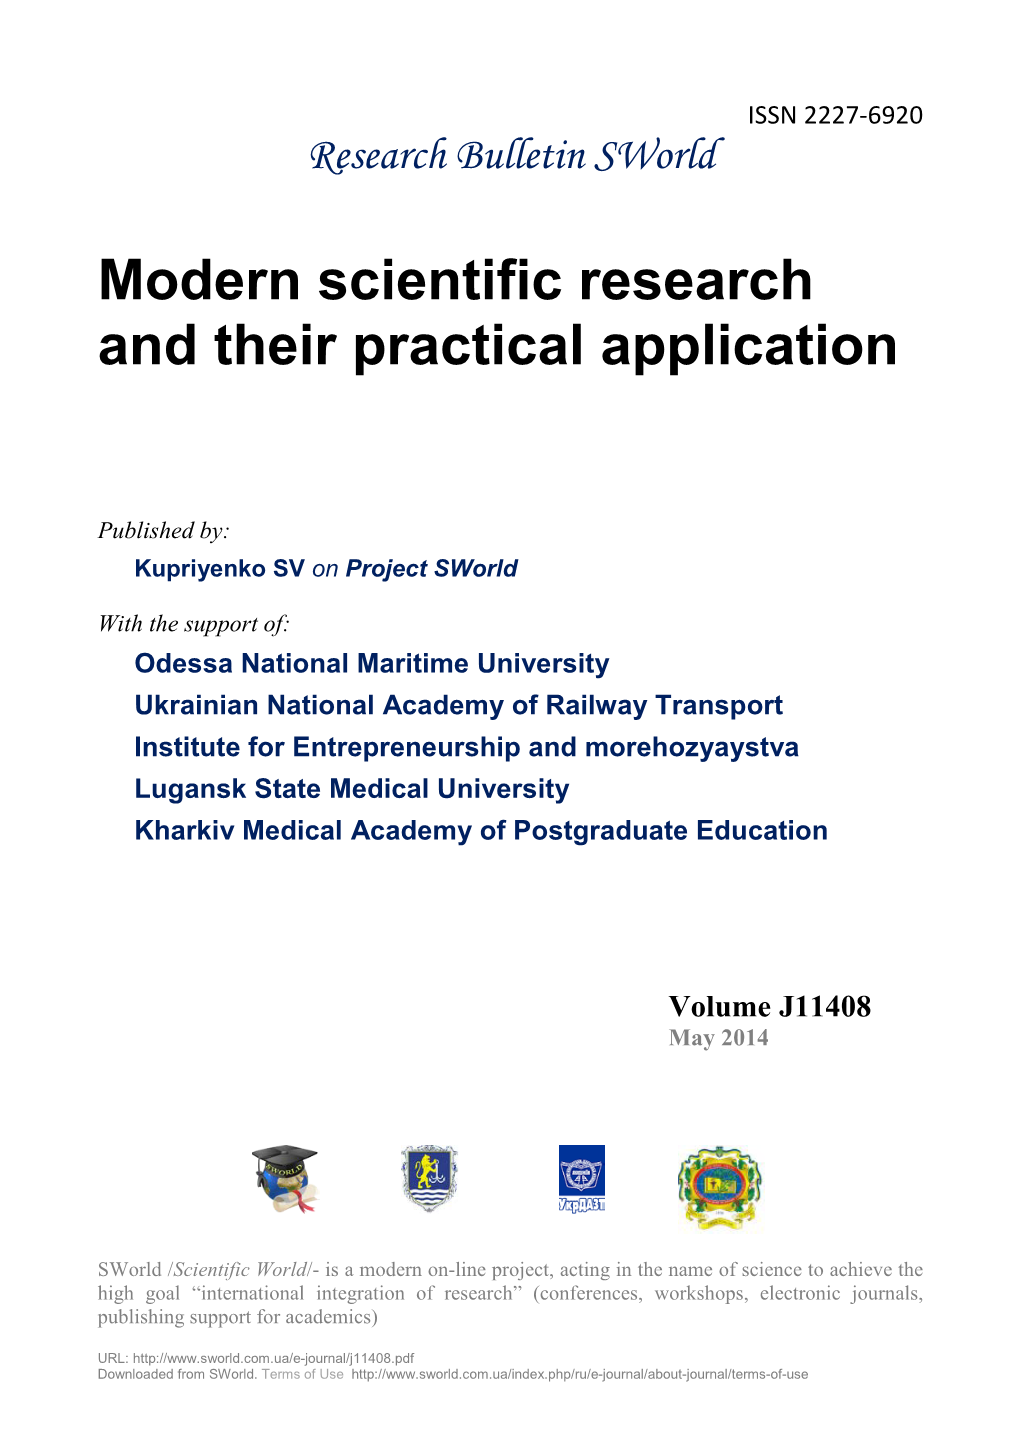 Modern Scientific Research and Their Practical Application